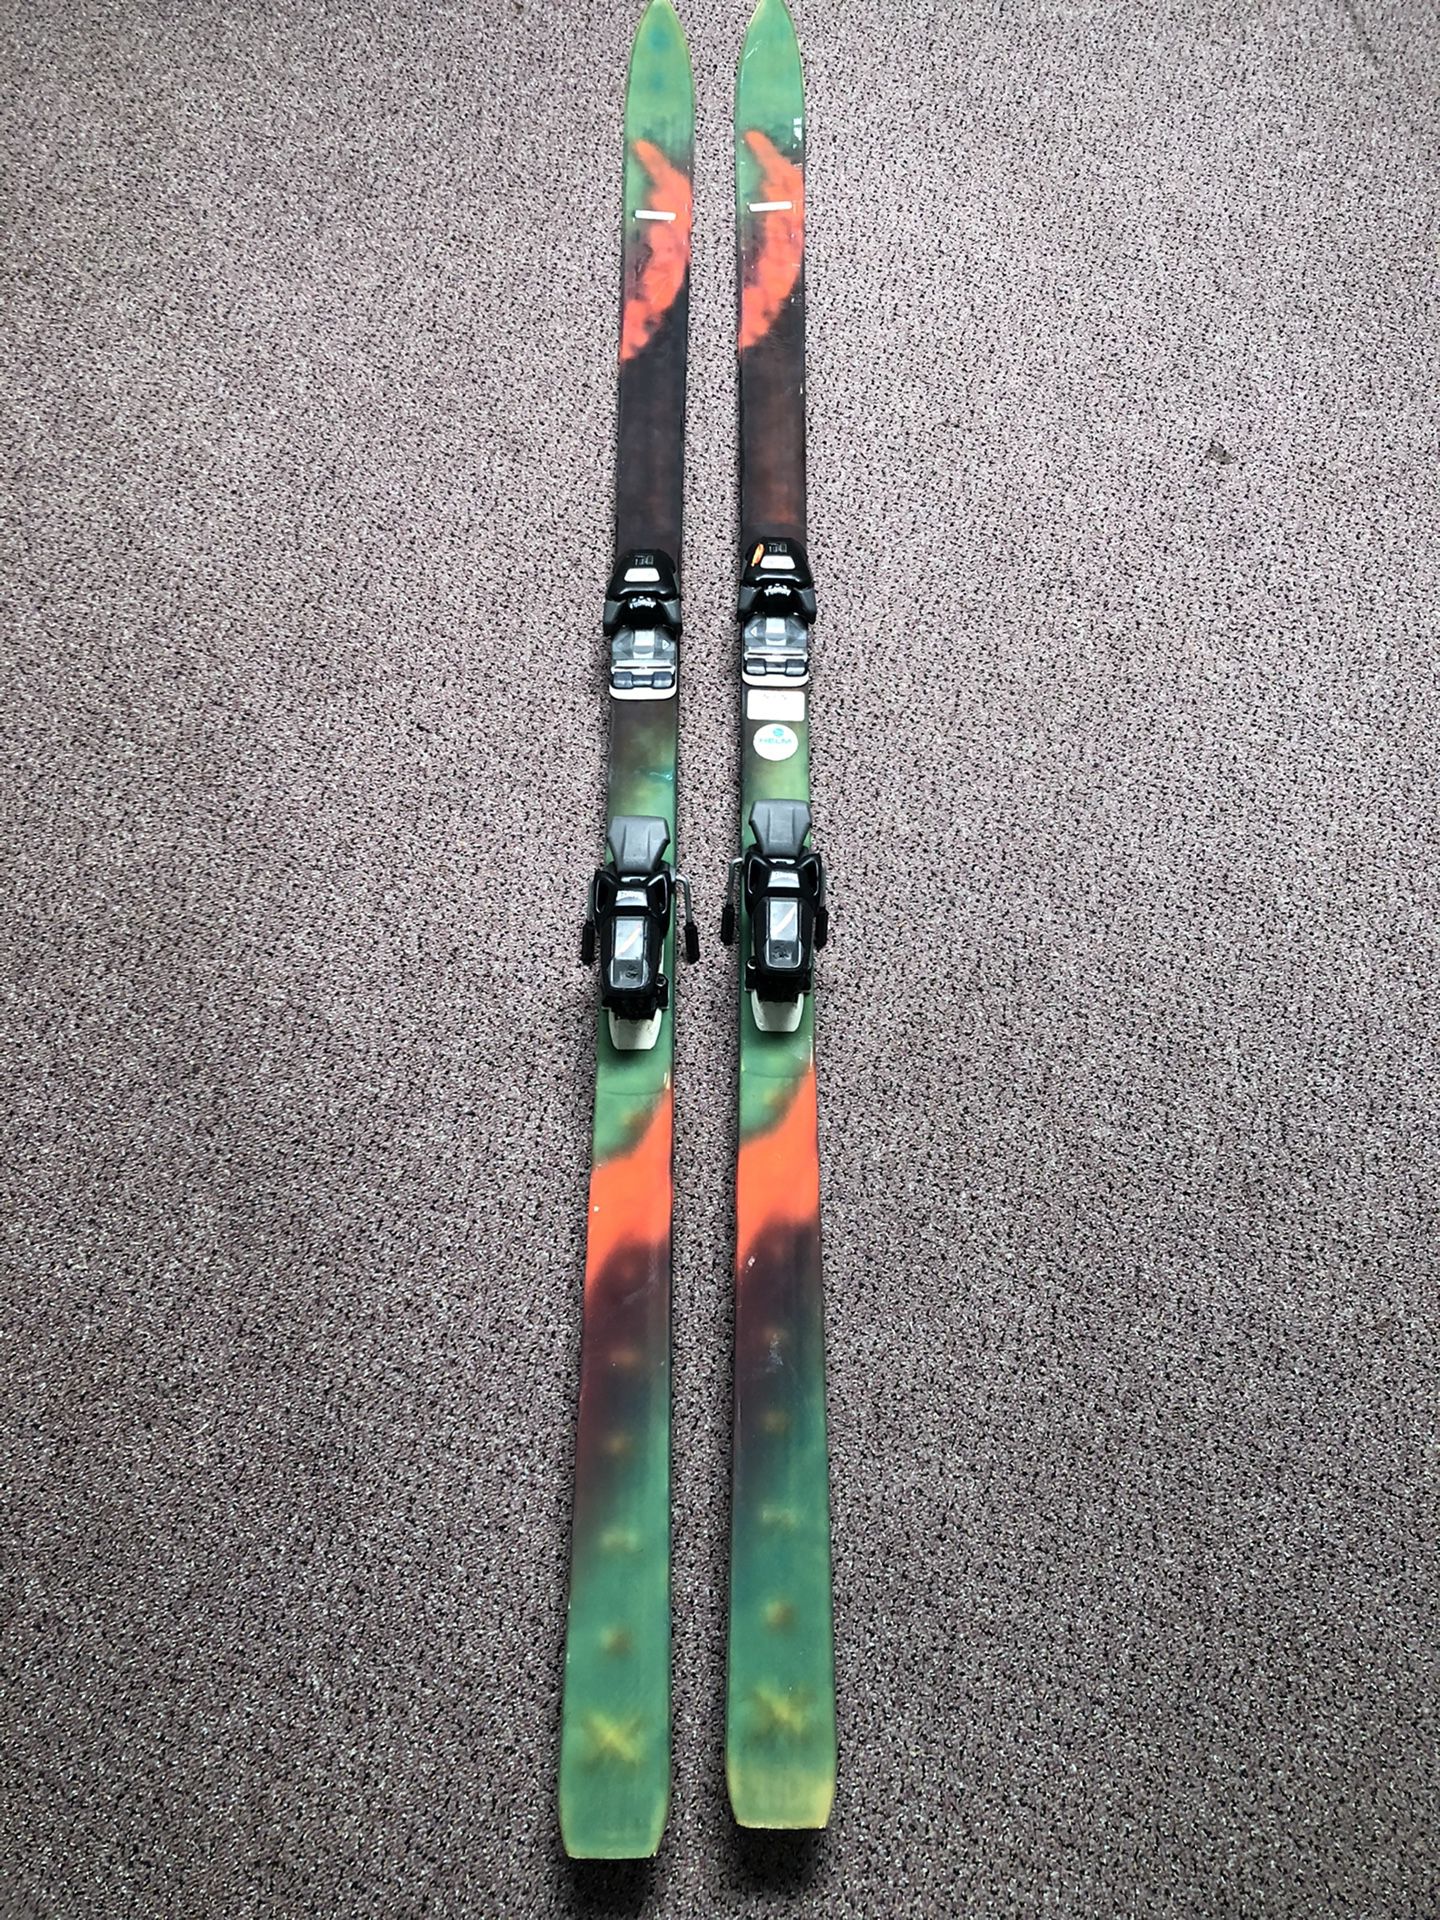 Used Downhill Skis